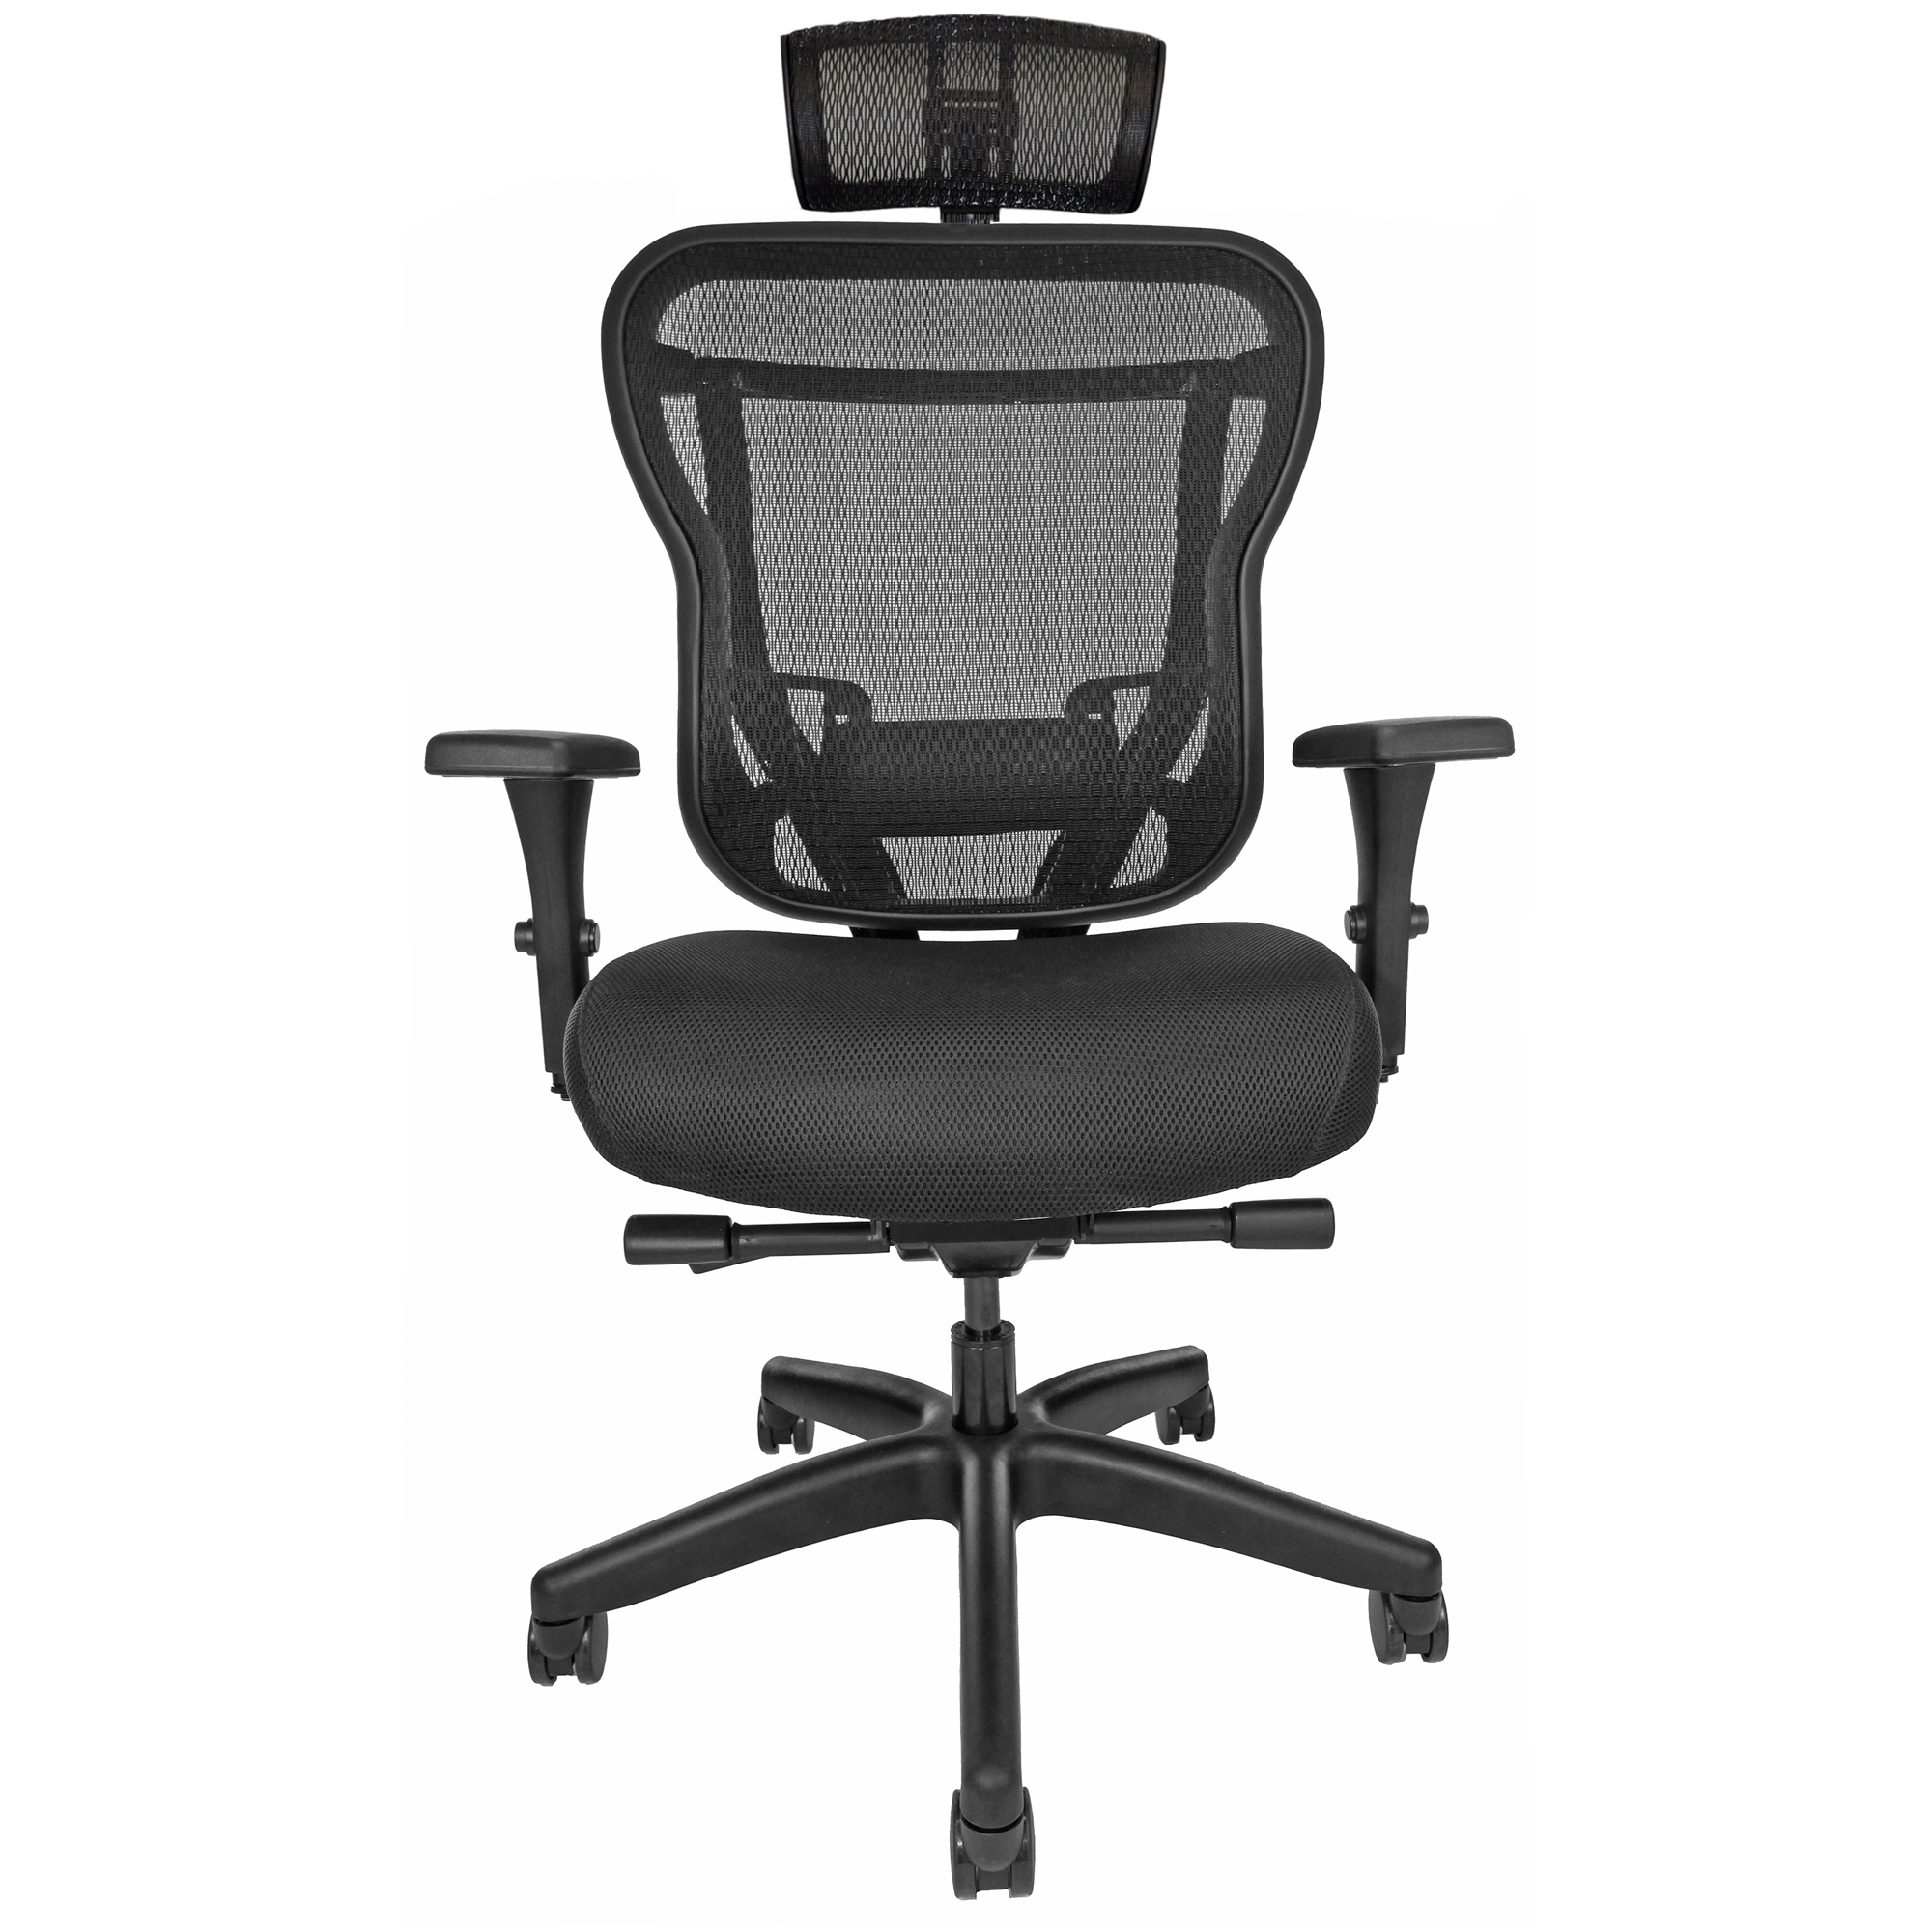 Mesh-back office chair with headrest